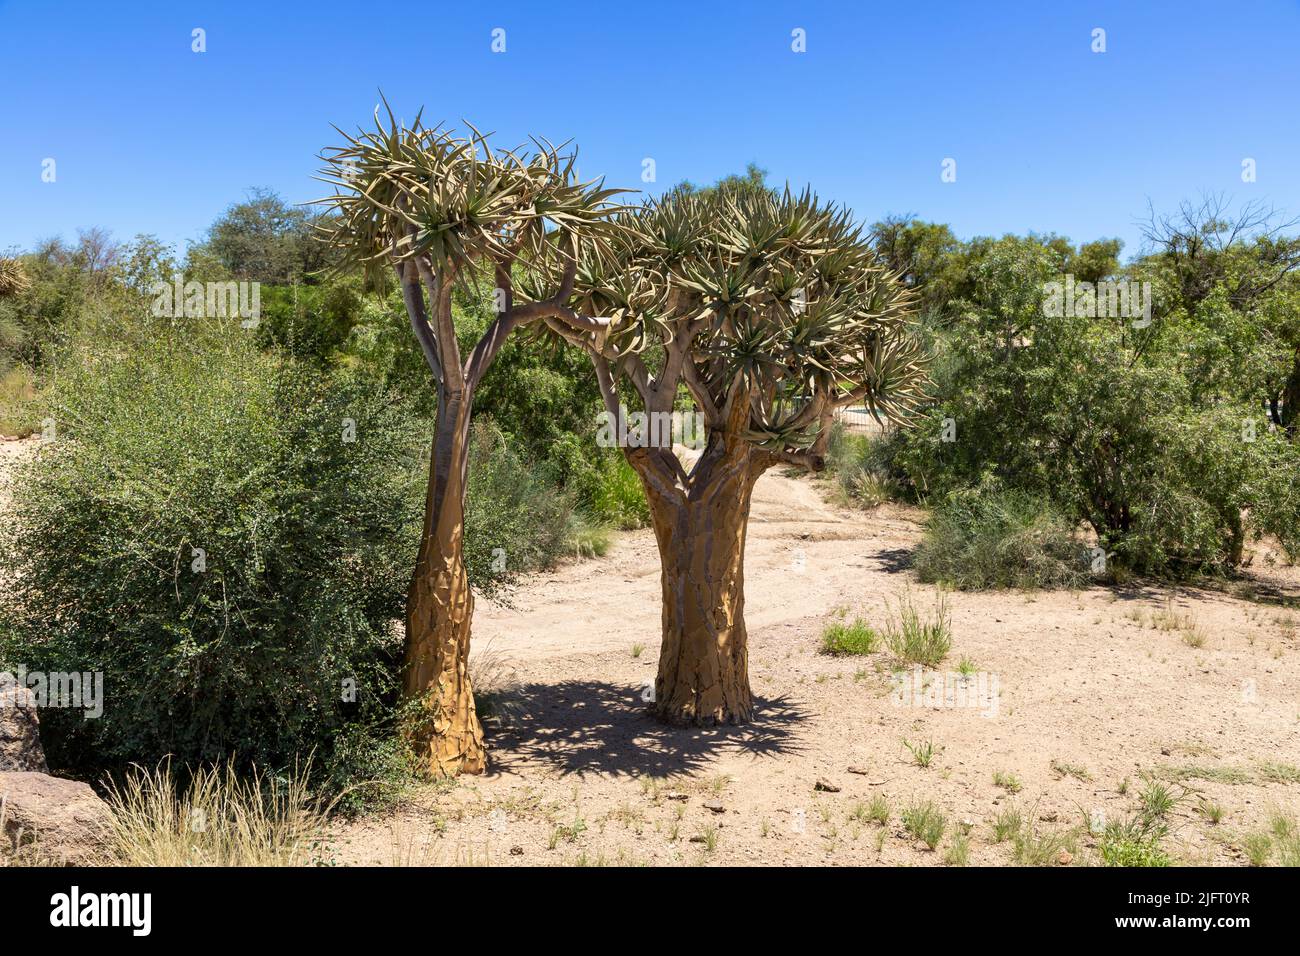 Two Quiver trees next to each other growing in desert sand in the Northern Cape, South Africa. Around them is shrubs growing. Stock Photo